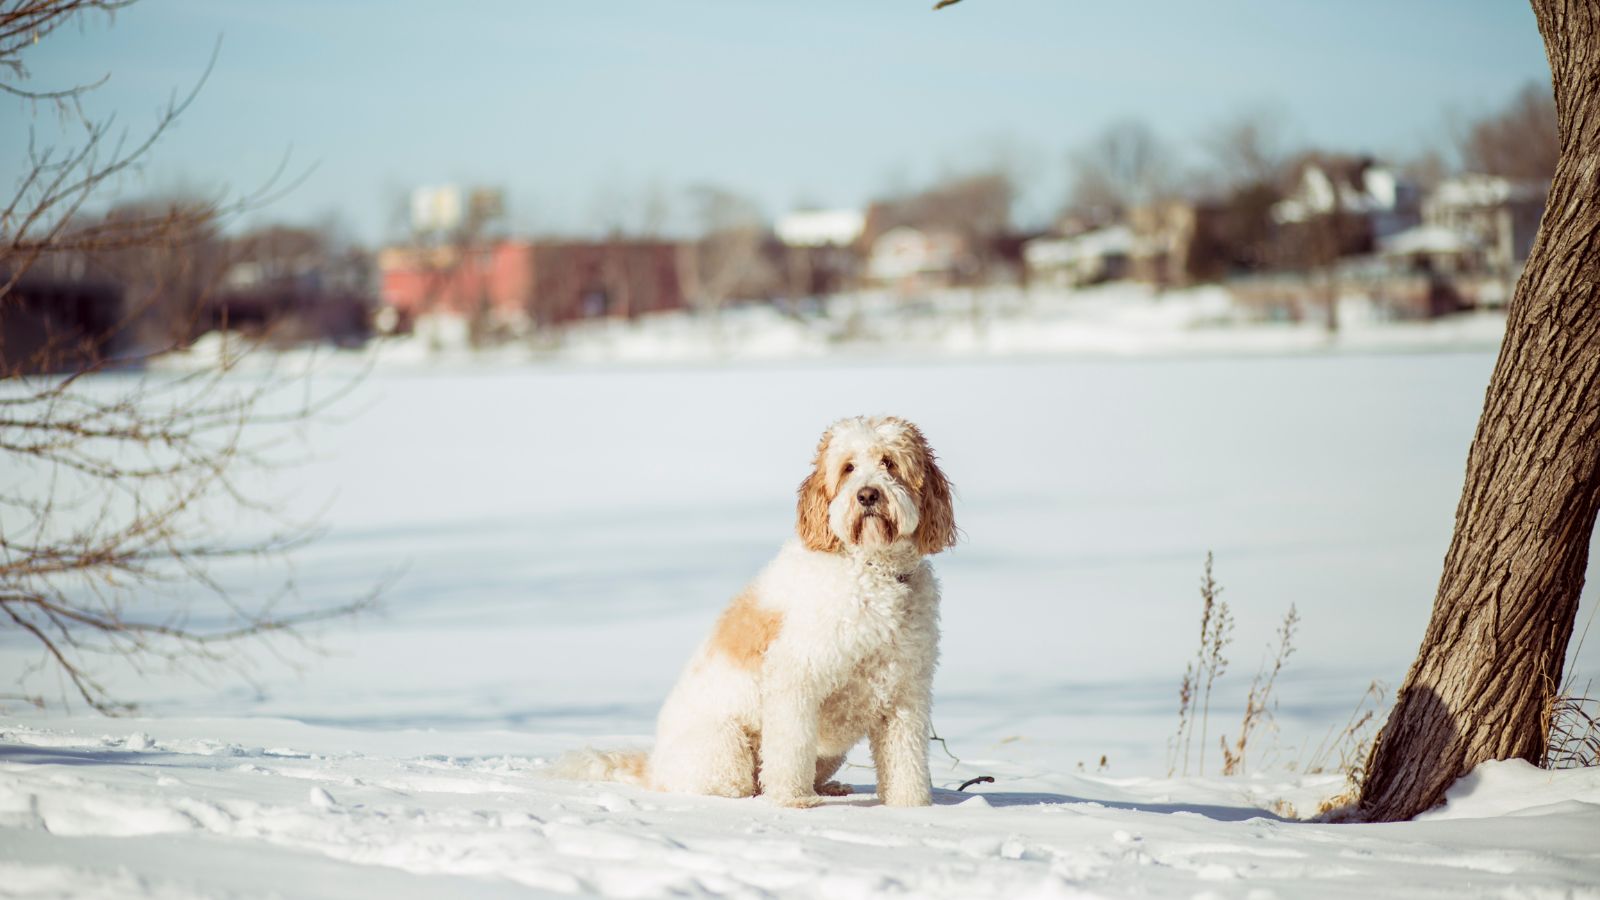 Goldendoodle on the snow